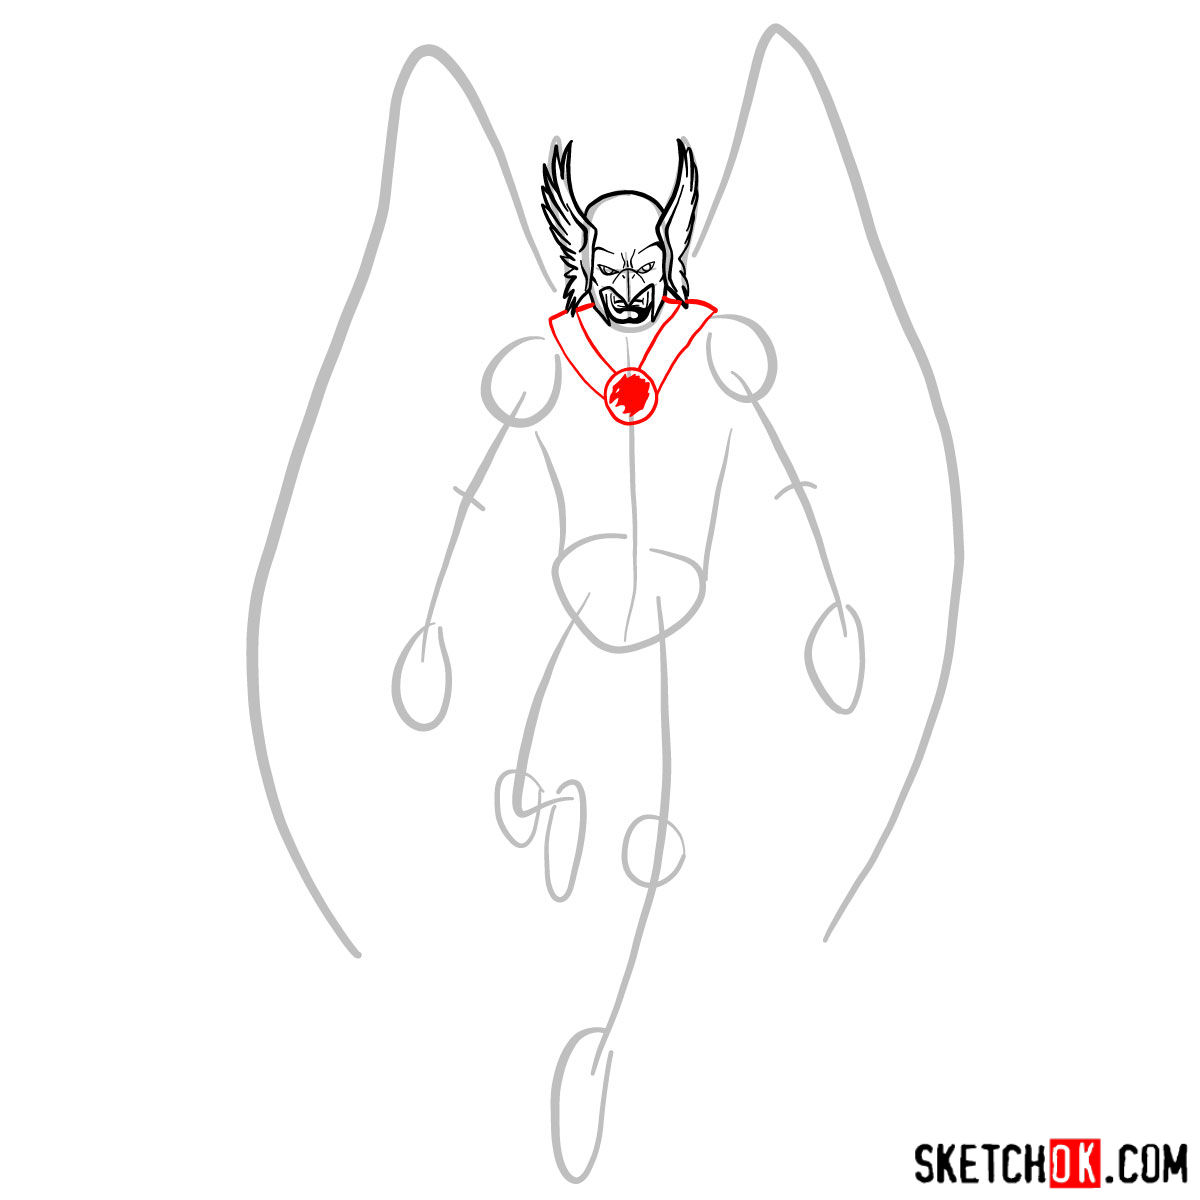 How to draw Hawkman from DC Comics - step 05